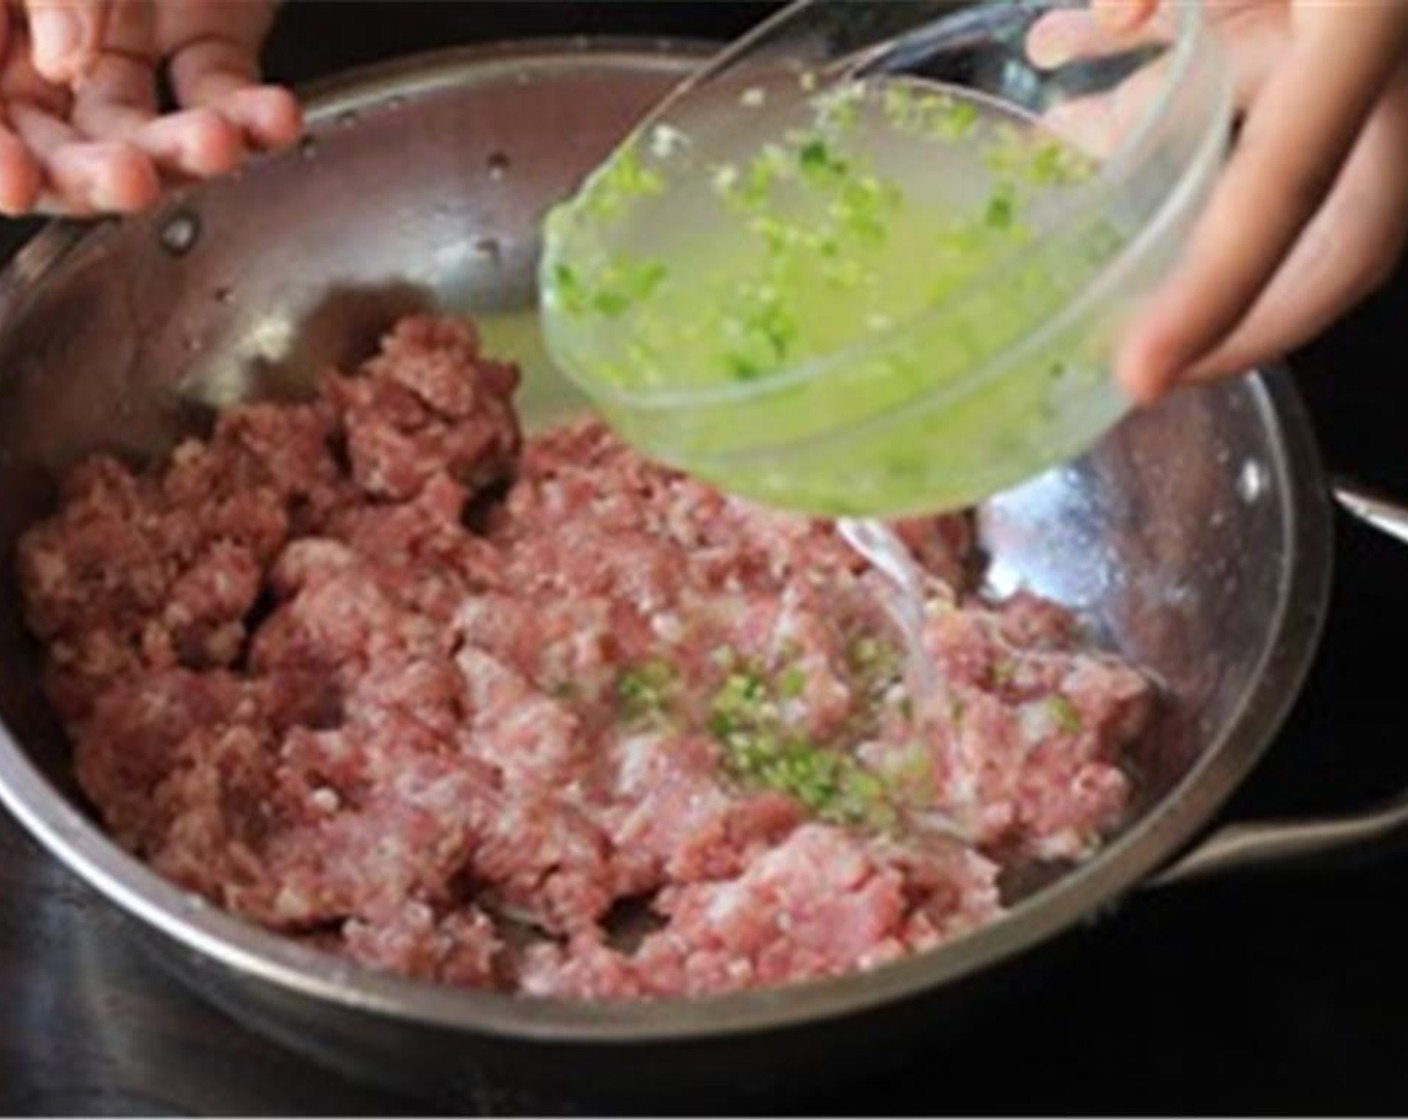 step 5 In a large mixing bowl, mix the ginger and green onion water with the Ground Pork (1 lb) by three batches. Use your hand to stir in one direction until the water is completely absorbed by the minced pork.